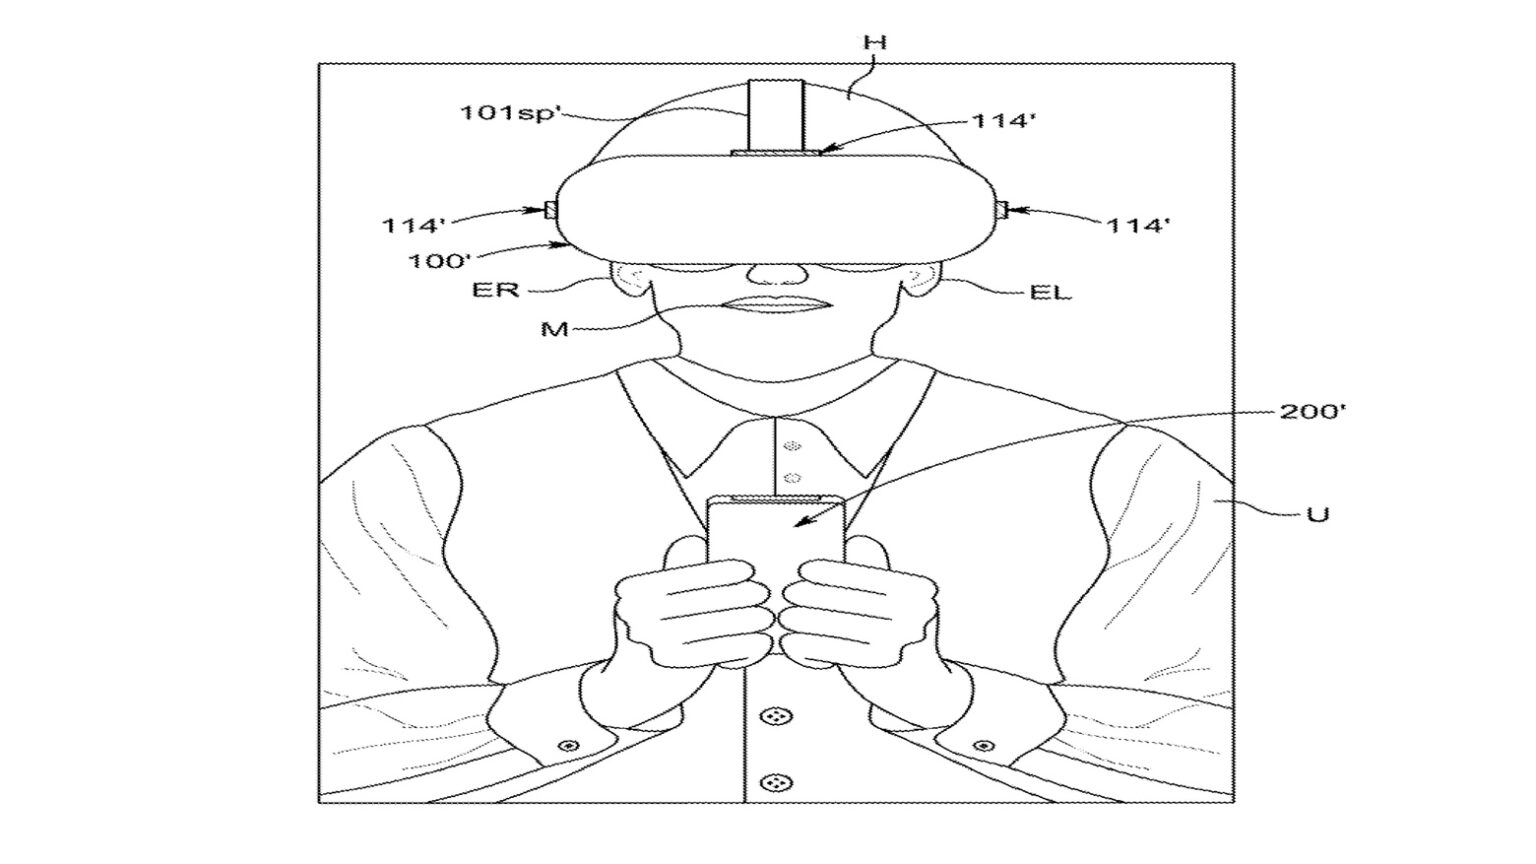 A Apple VR headset is an Open secret, as demonstrated by a recent patent filing.